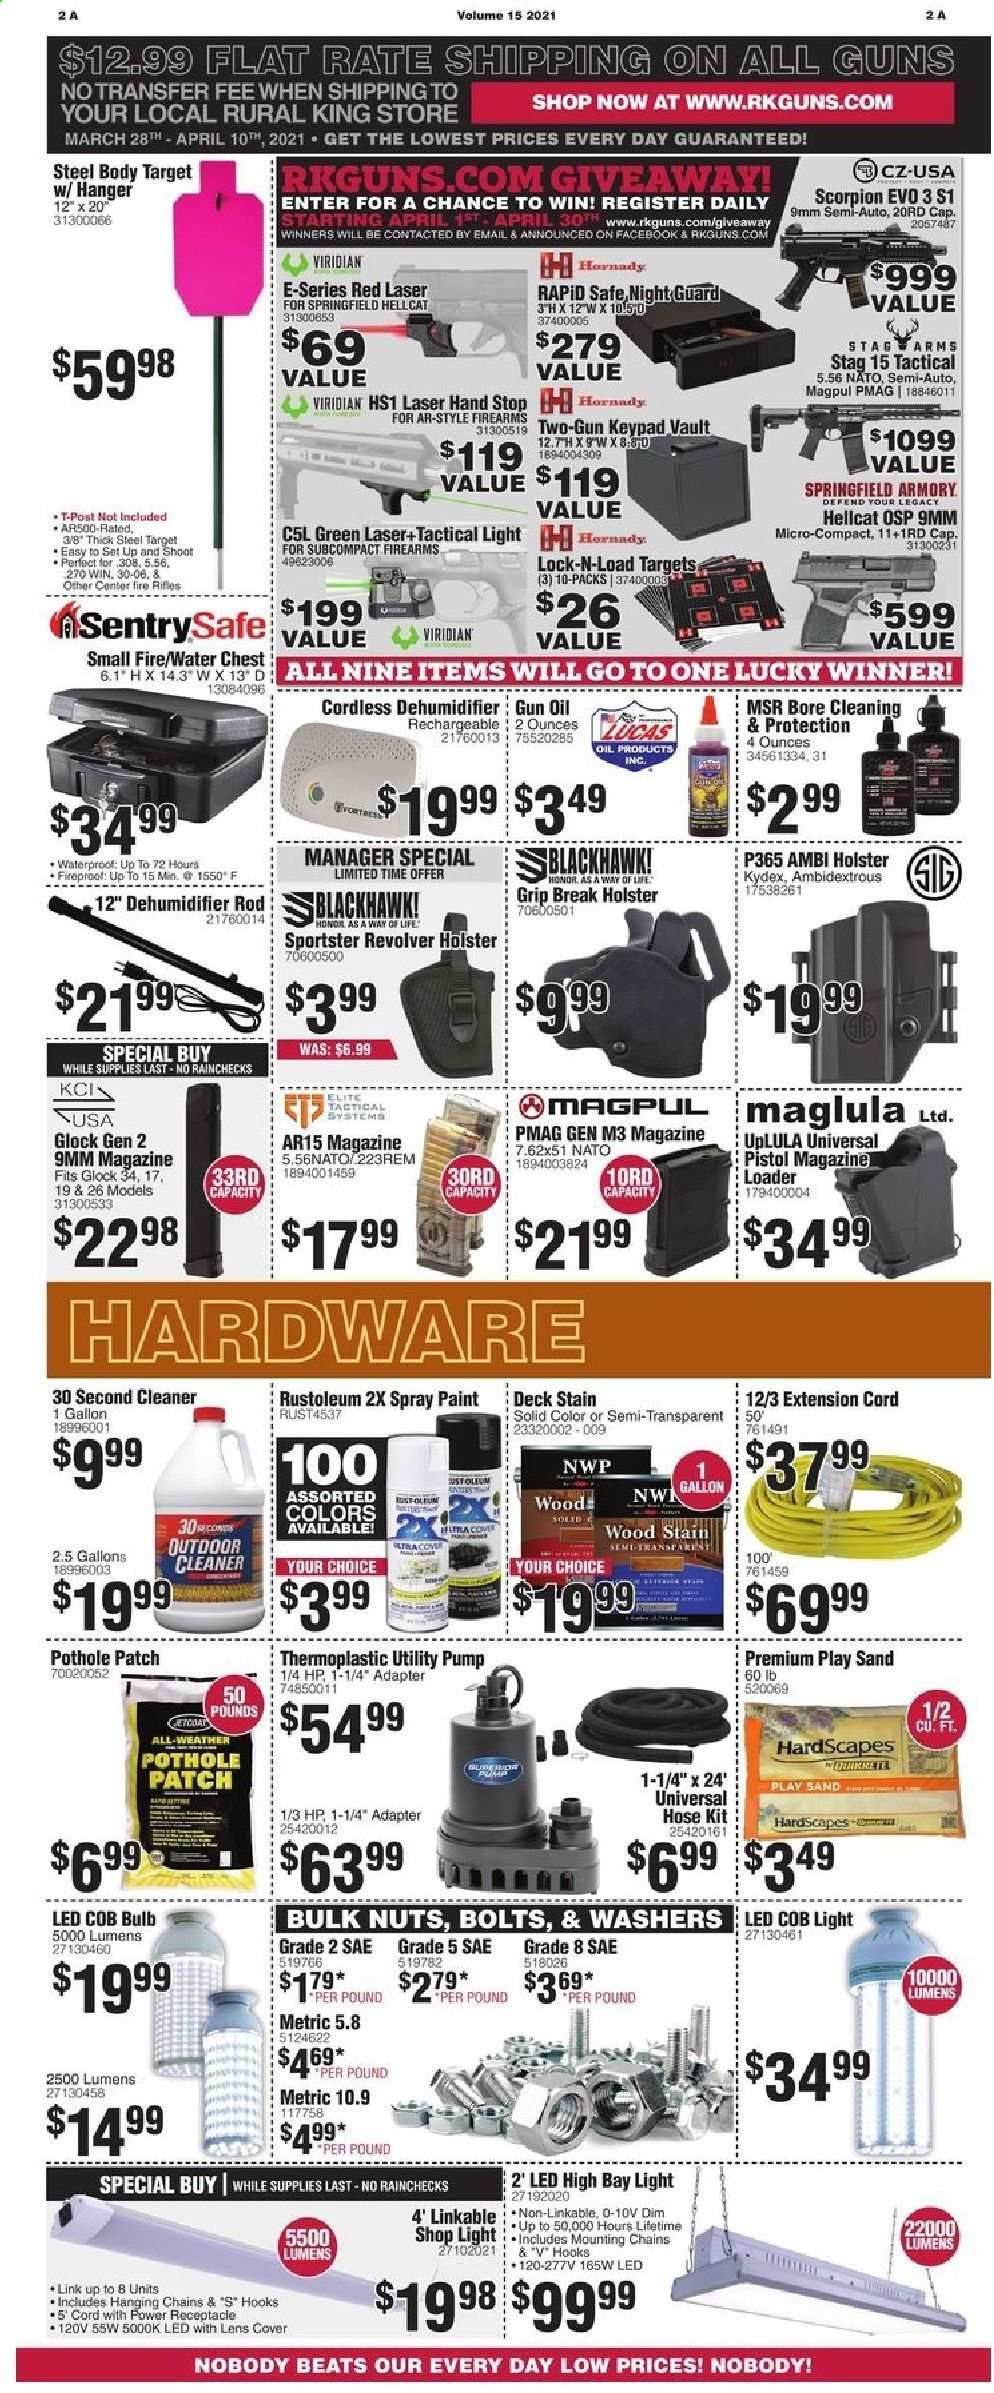 thumbnail - Rural King Flyer - 03/28/2021 - 04/10/2021 - Sales products - oil, hook, hanger, bulb, Honor, lens, Beats, Hewlett Packard, adapter, cap, glock, rifle, Springfield Armory, gun, holster, pistol, steel target, Magpul, shop light, extension cord, washers, pump, spray paint, cleaner. Page 2.